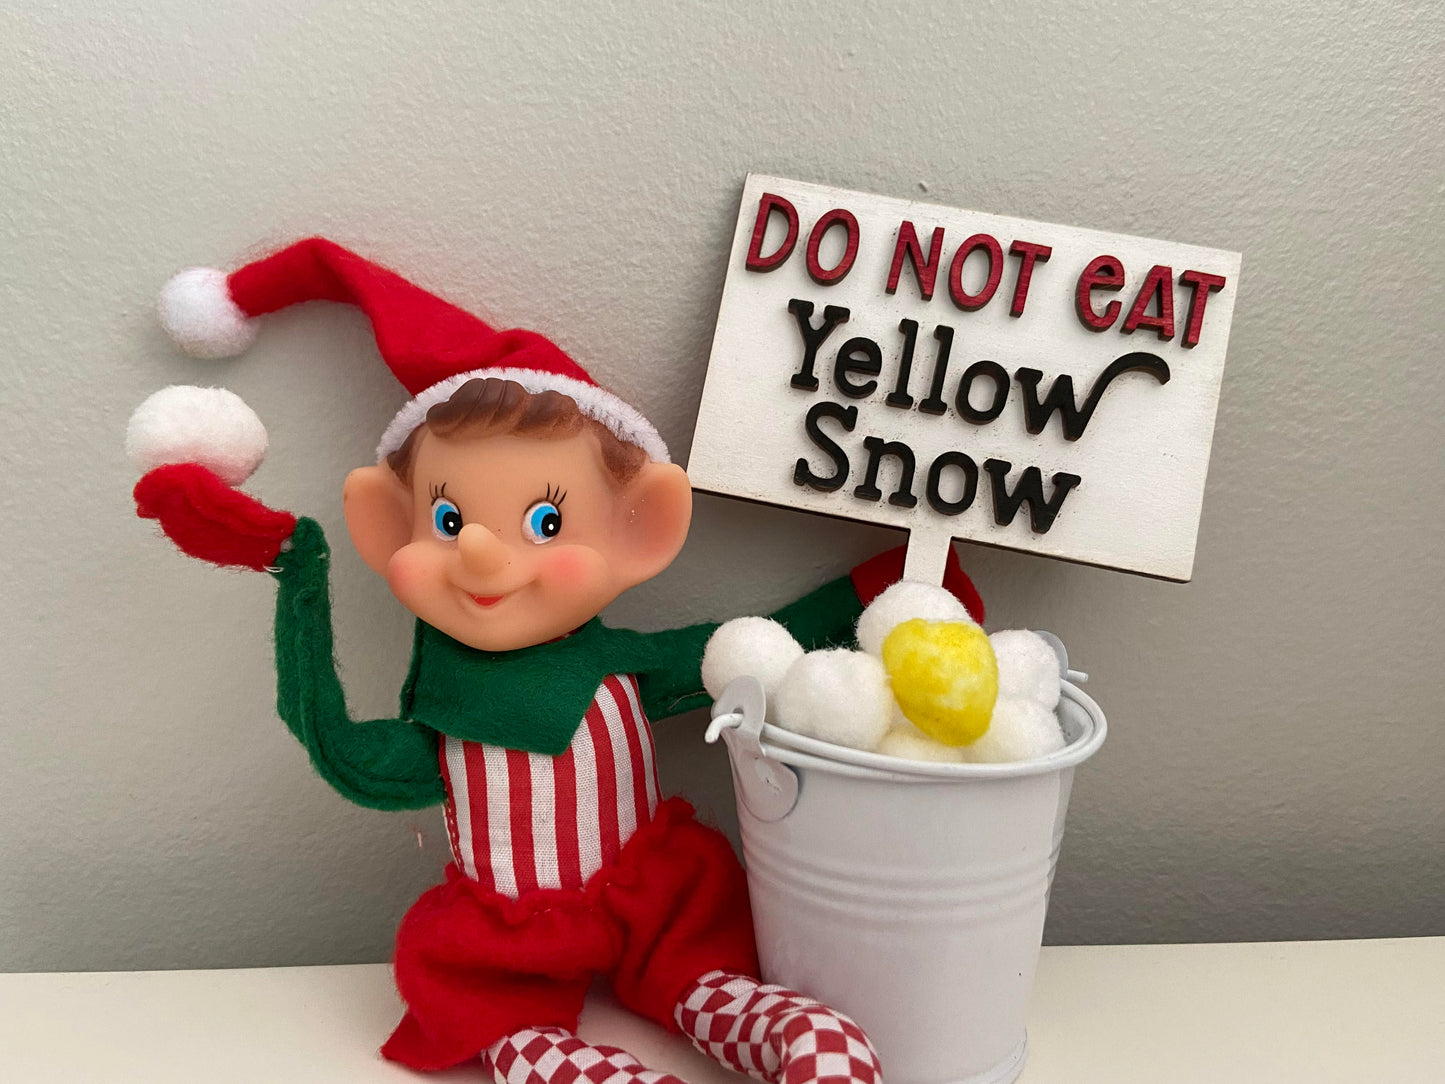 Christmas Elf Kit #2 - Props and Signs (Ready to Paint)